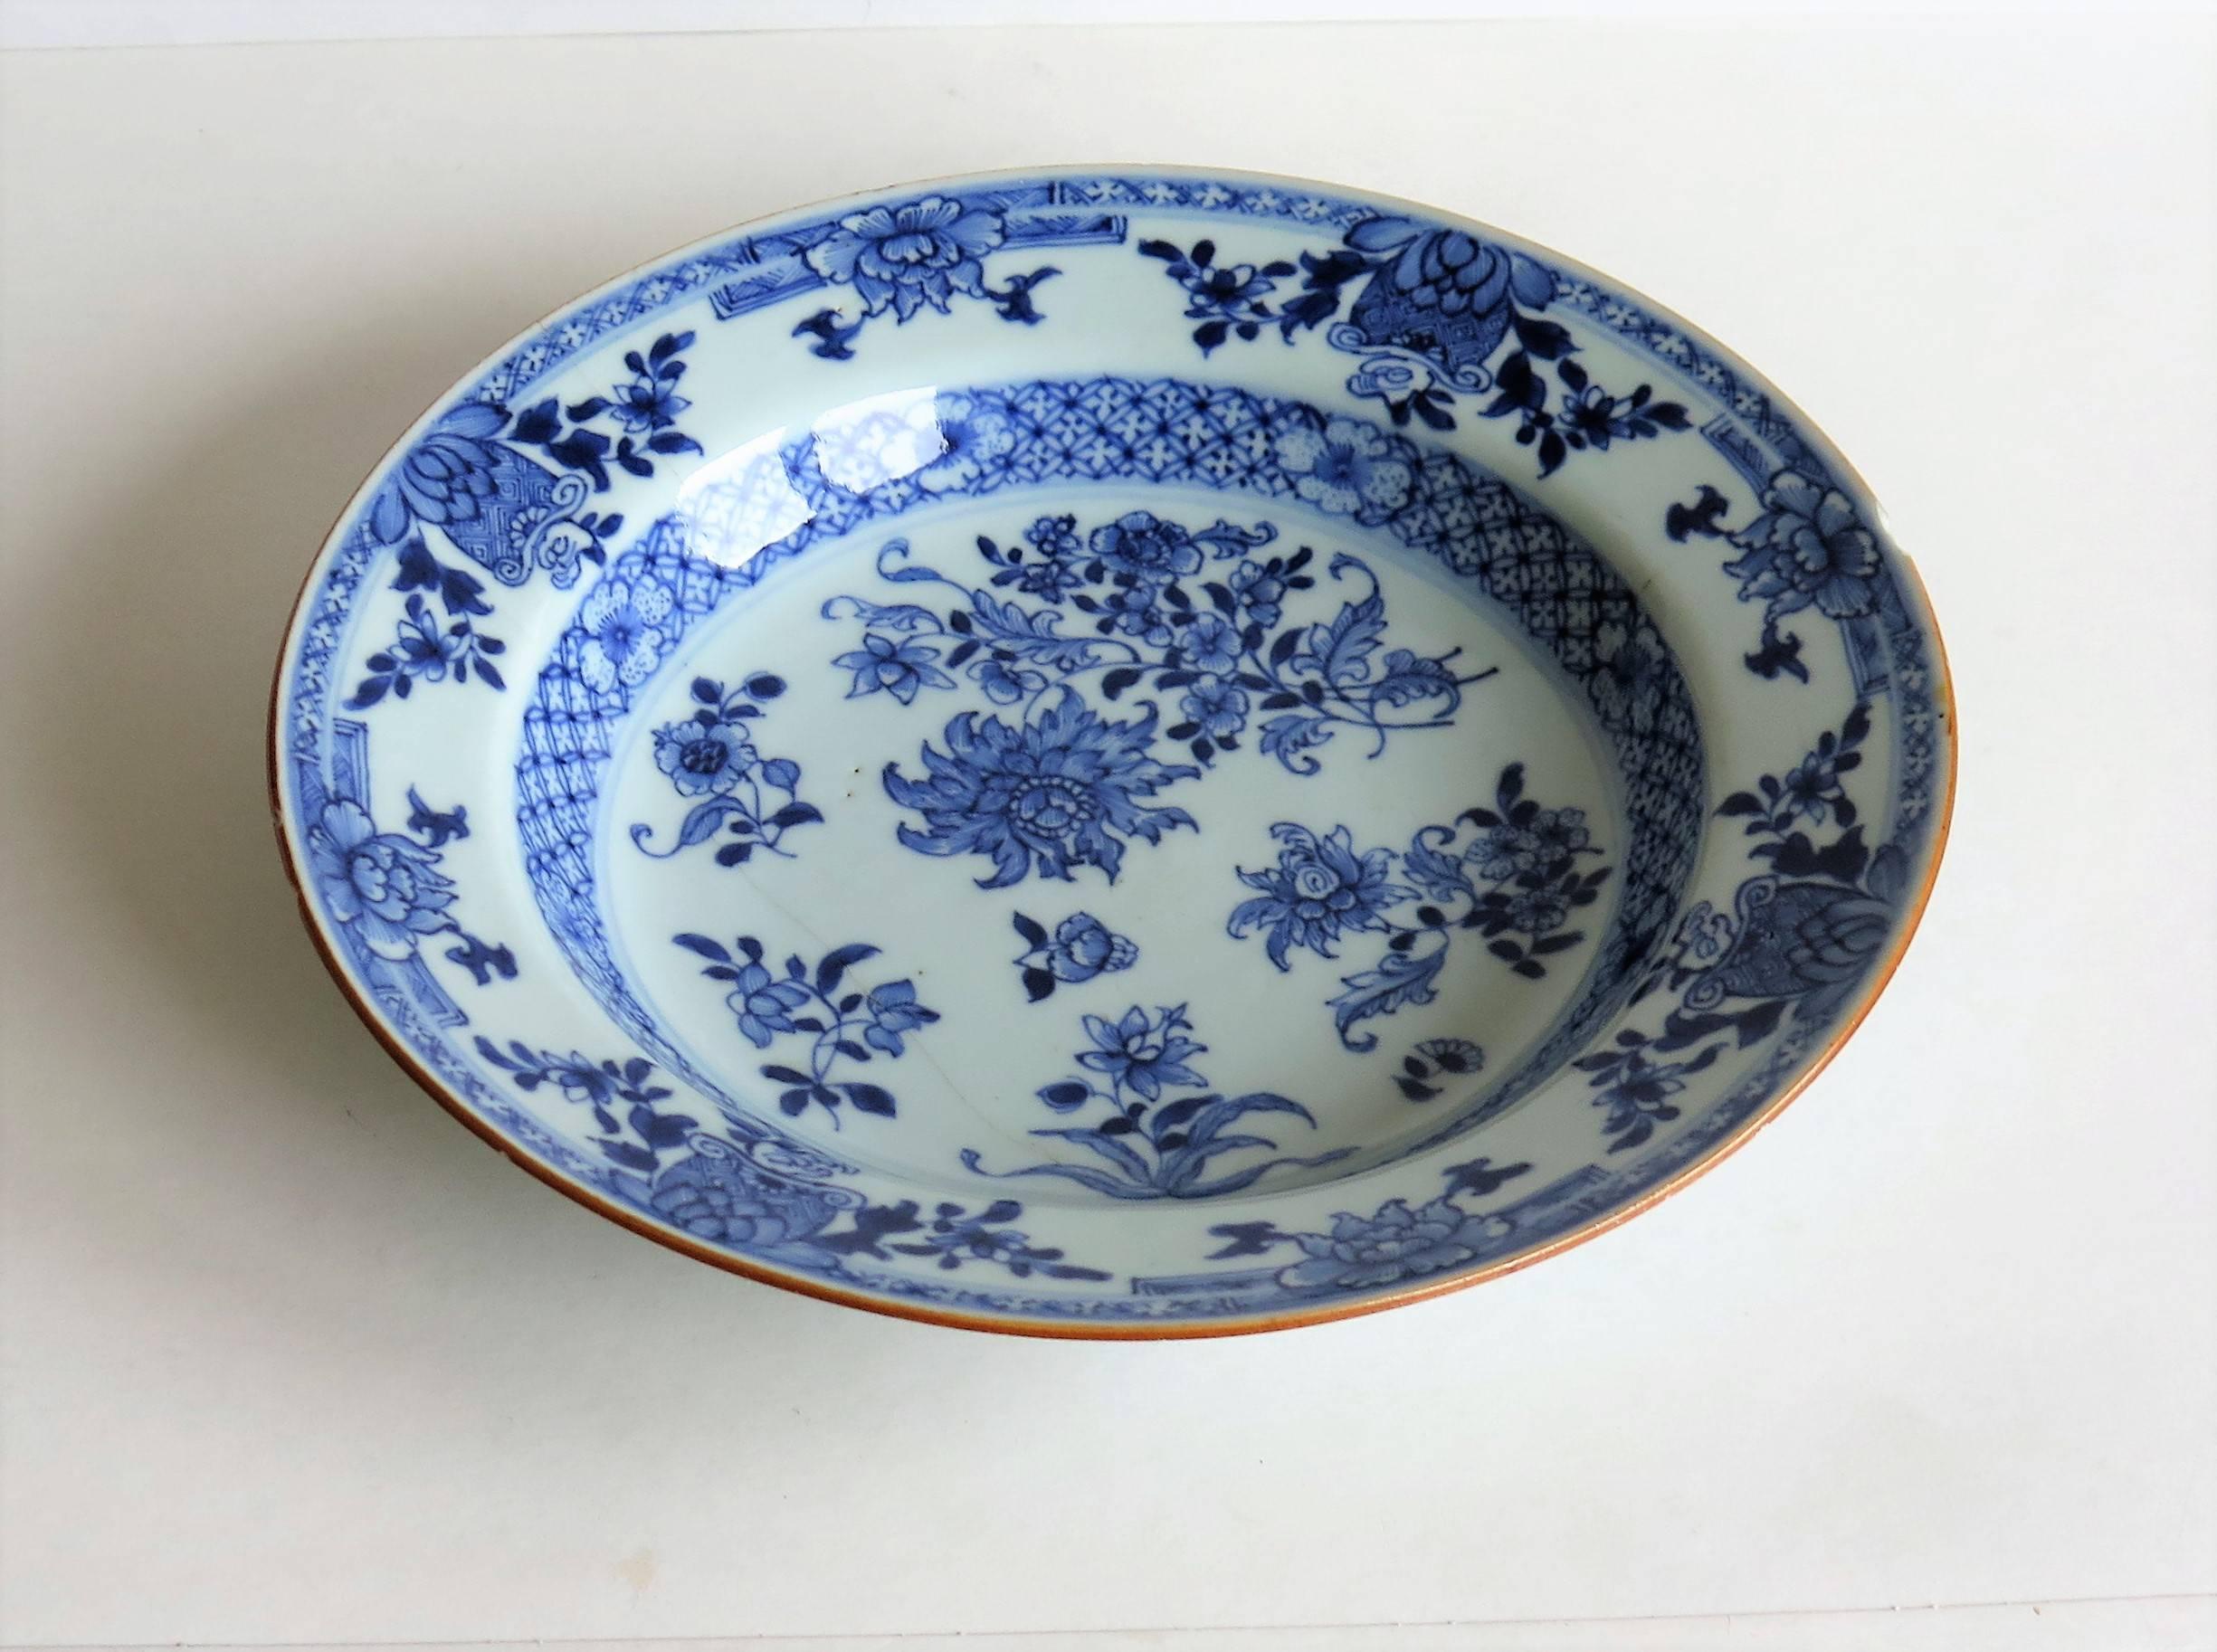 Chinese Porcelain Plate or Bowl, Blue and White, Floral Sprigs, circa 1770 1